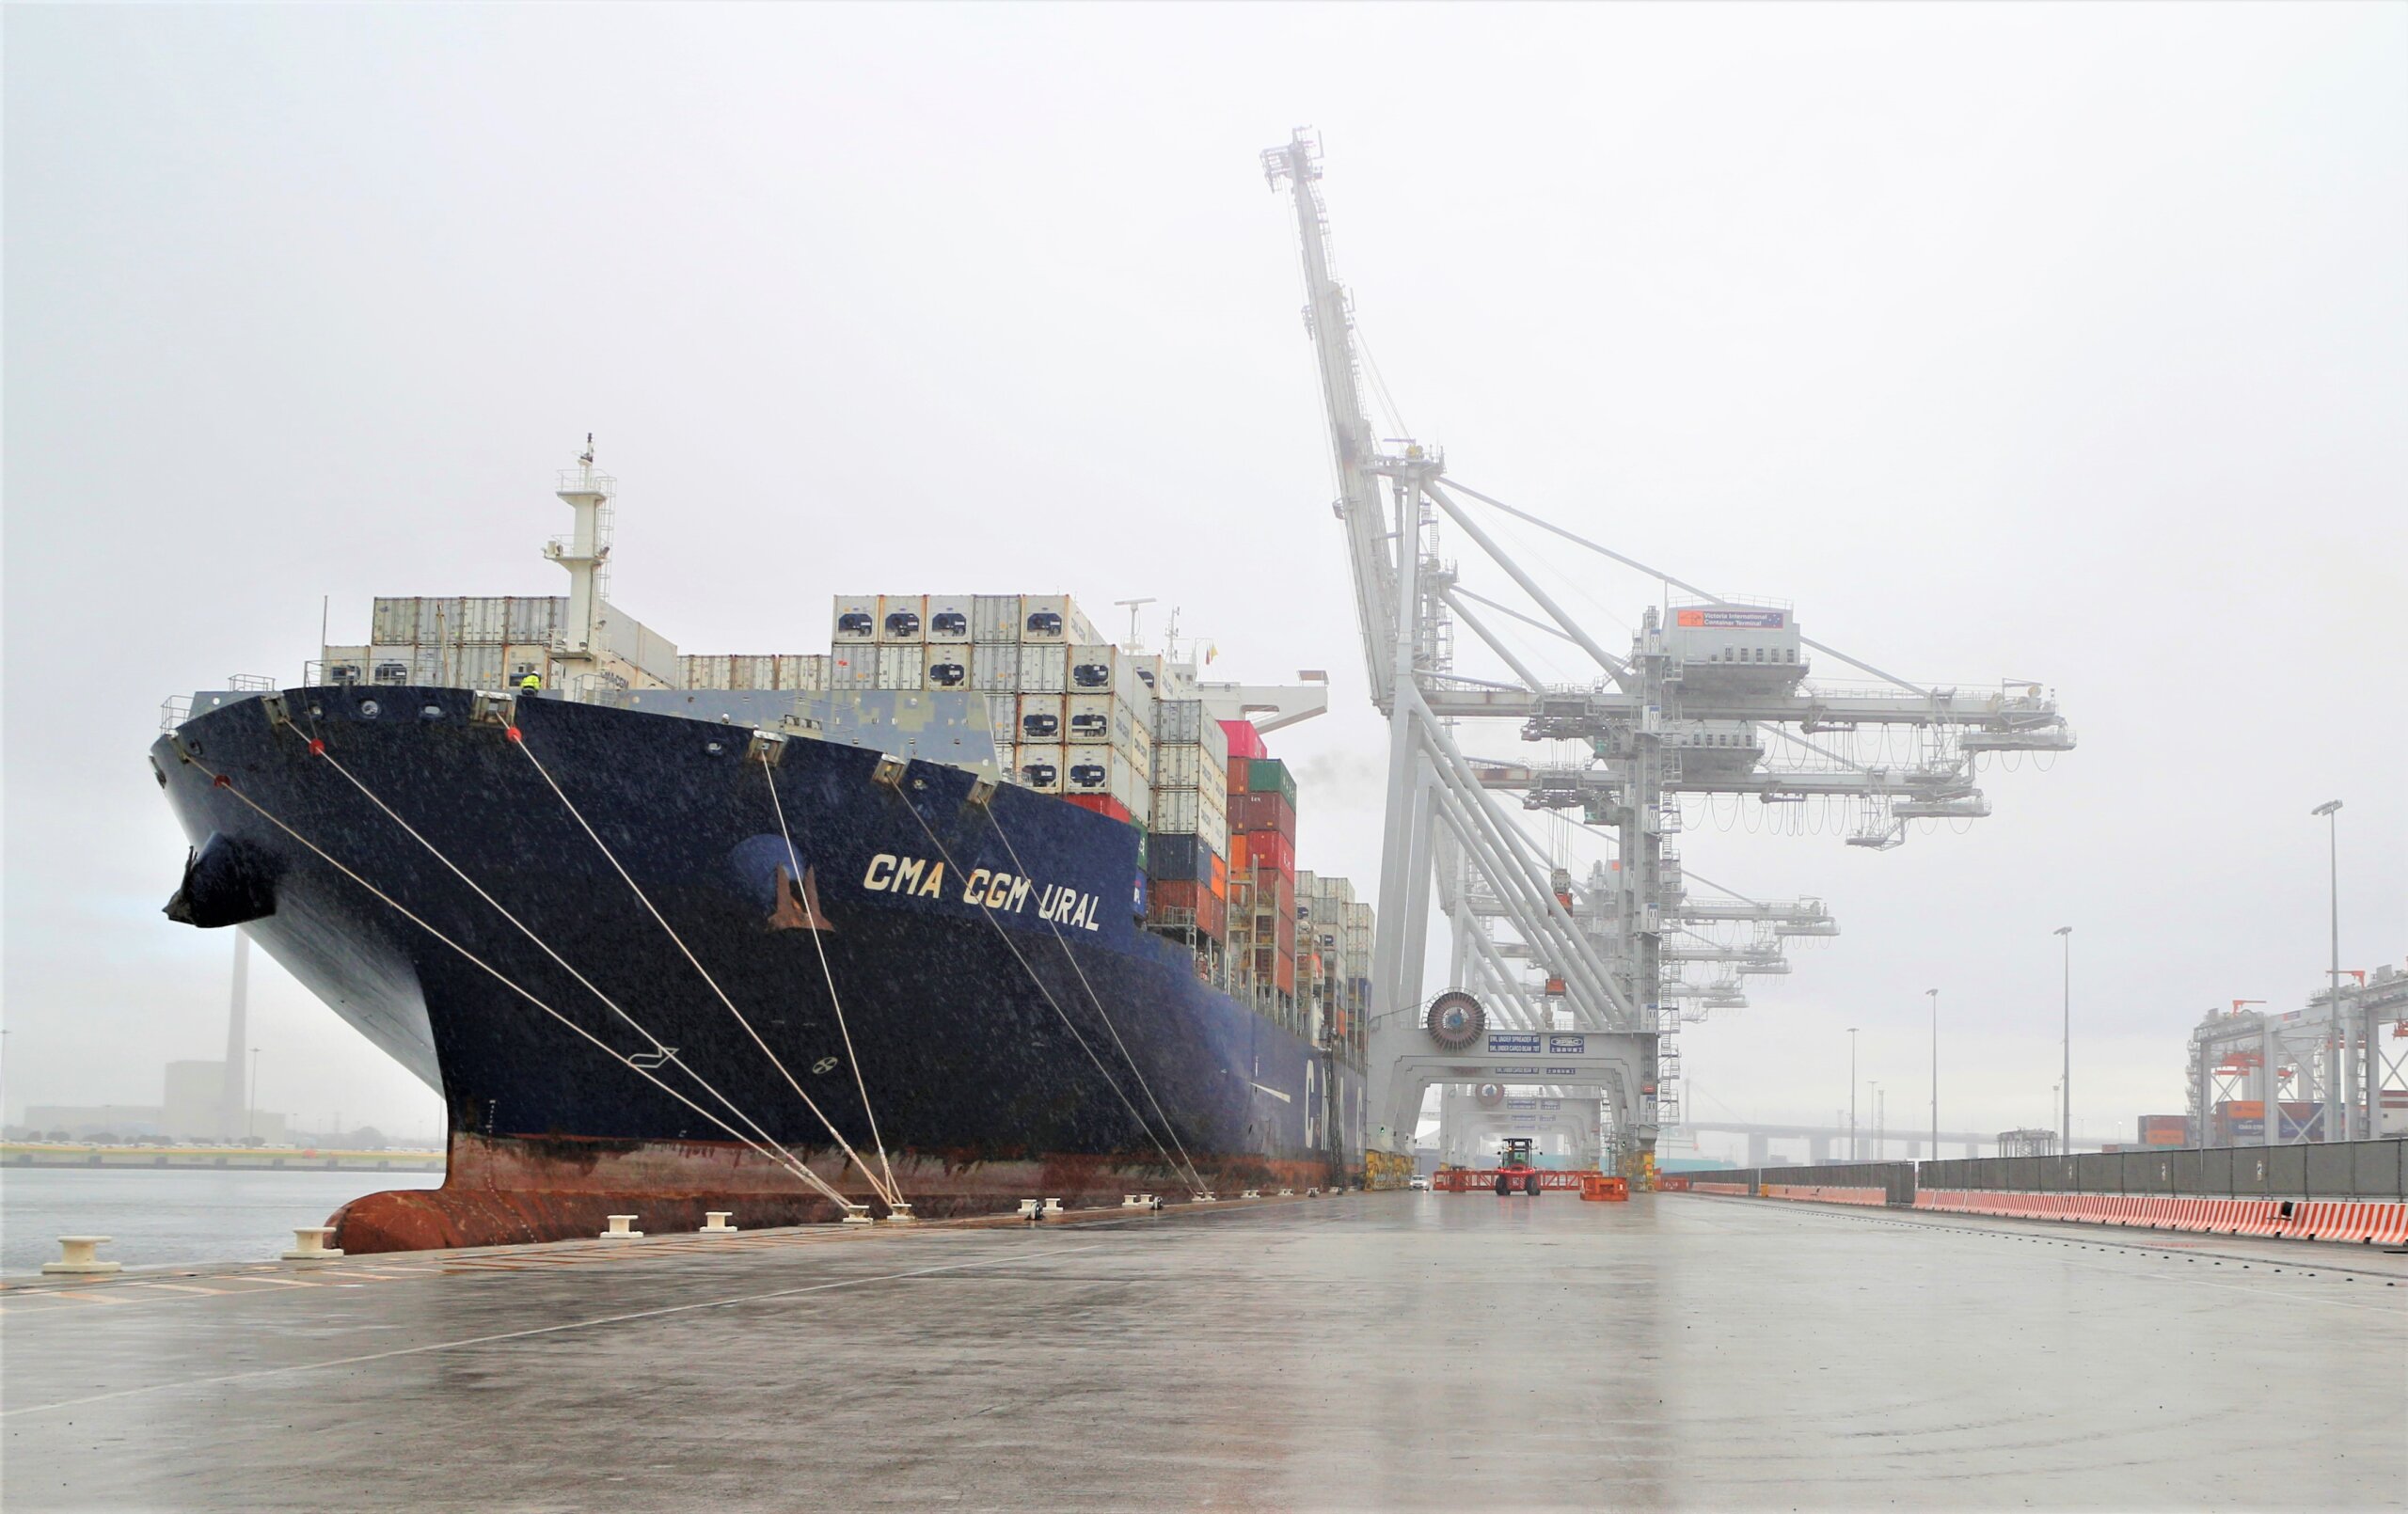 Port of Melbourne welcomes largest container capacity ship to dock in Melbourne